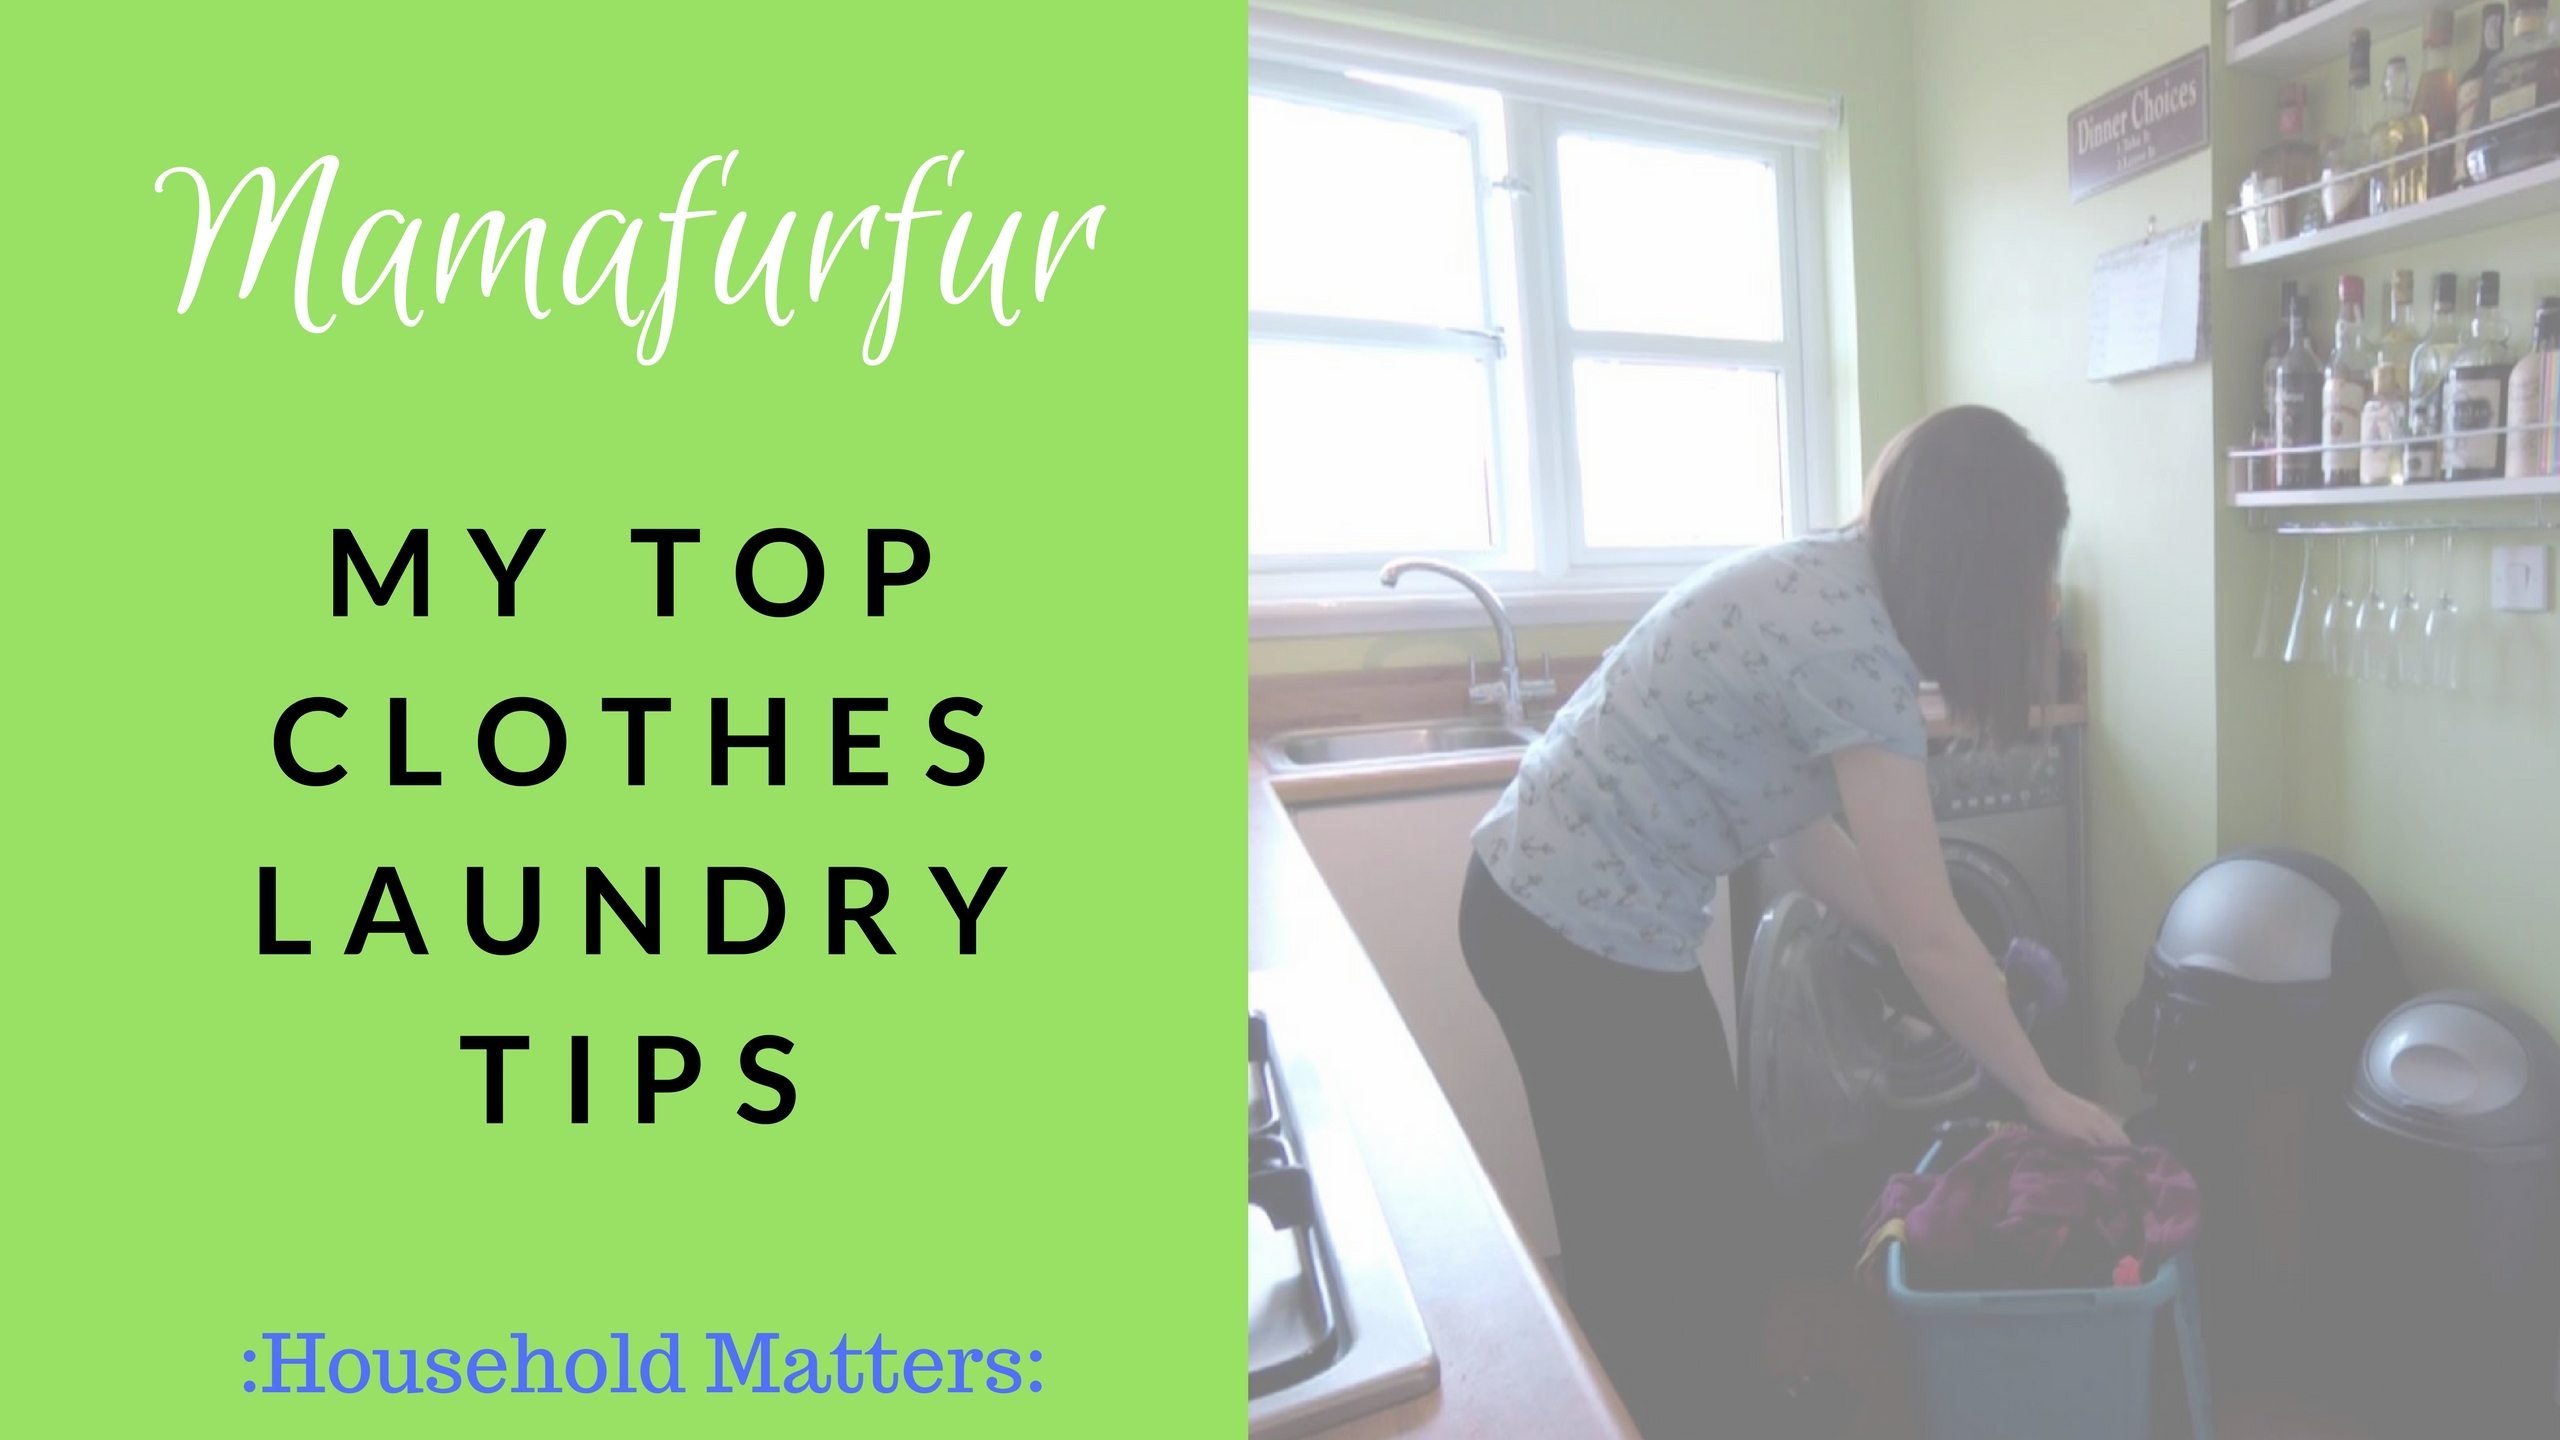 My top Clothes Laundry Hacks and Tips - Mamafurfur